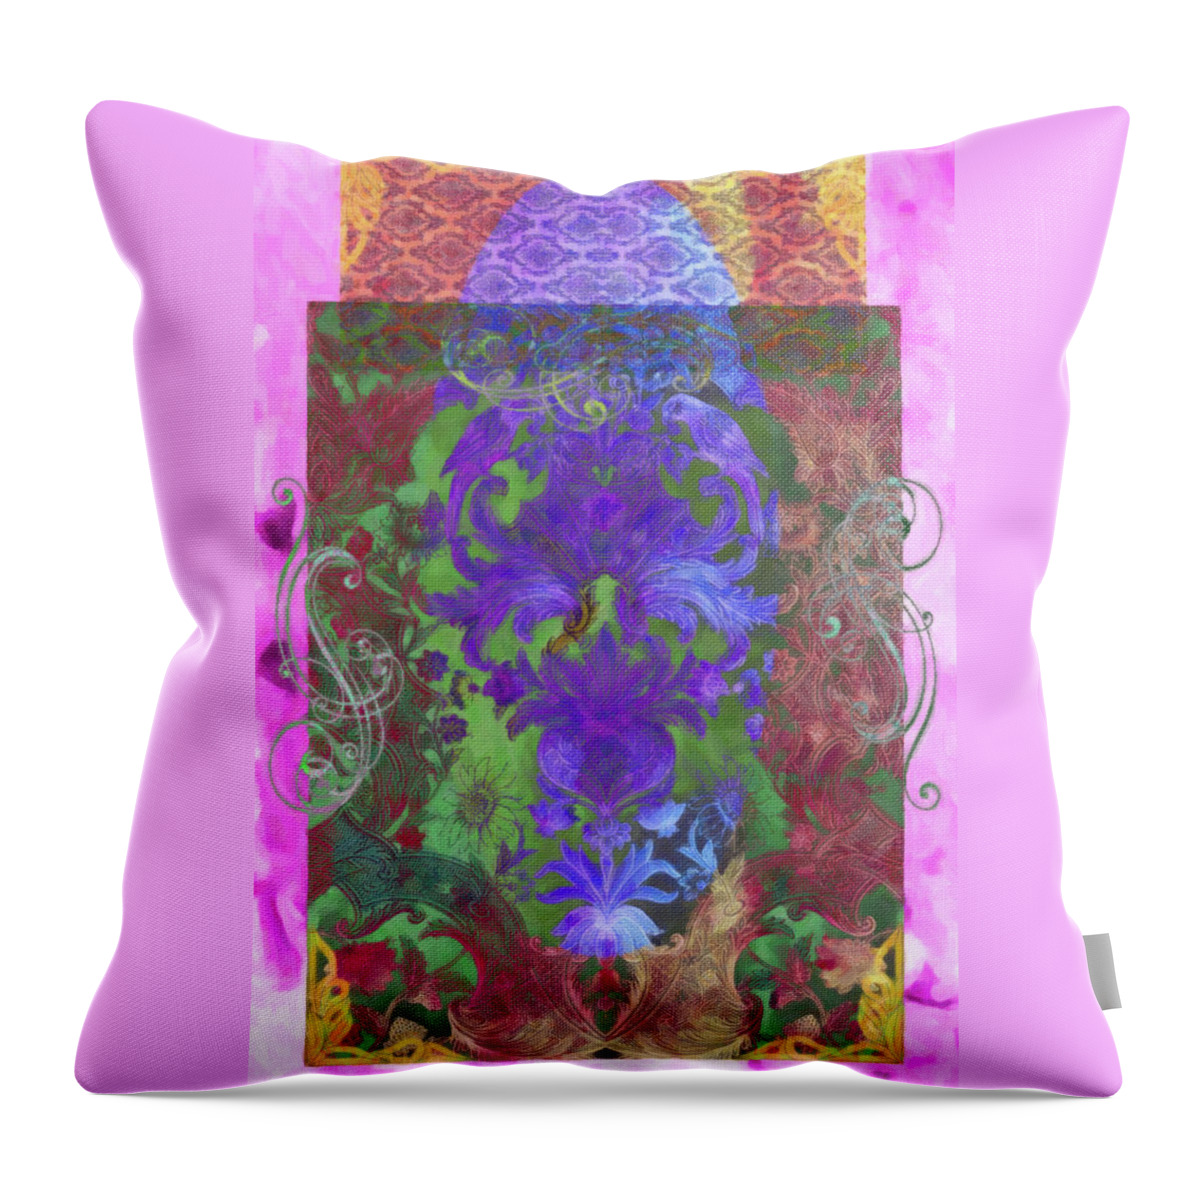 Design Throw Pillow featuring the mixed media Flourish 6 by Priscilla Huber